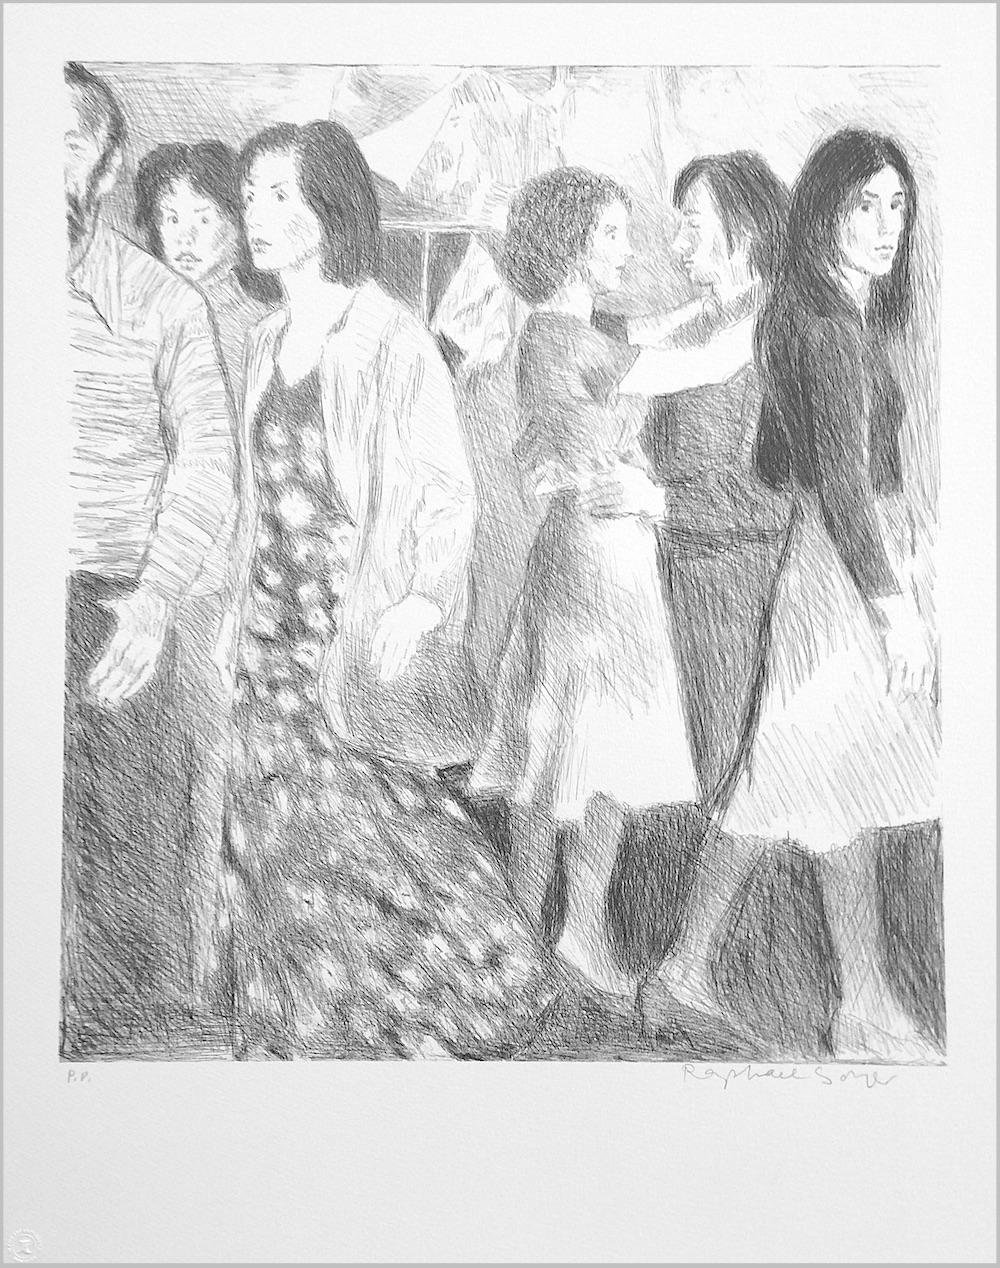 STREET SCENE Signed Lithograph, NYC Crowd Portrait Pencil Drawing, A-Line Skirts - Print by Raphael Soyer